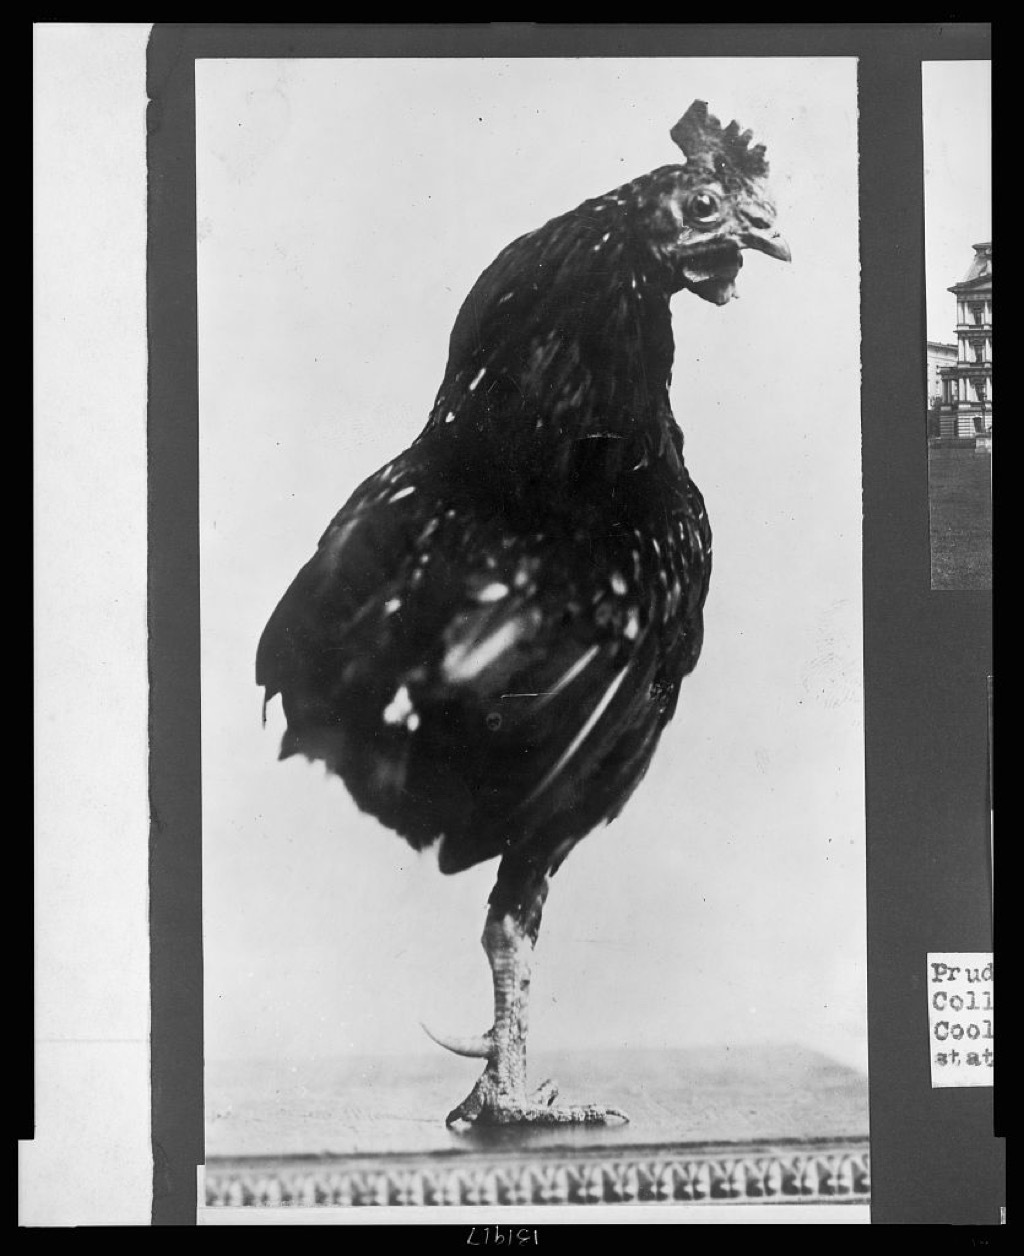 Theodore Roosevelt's one-legged pet rooster